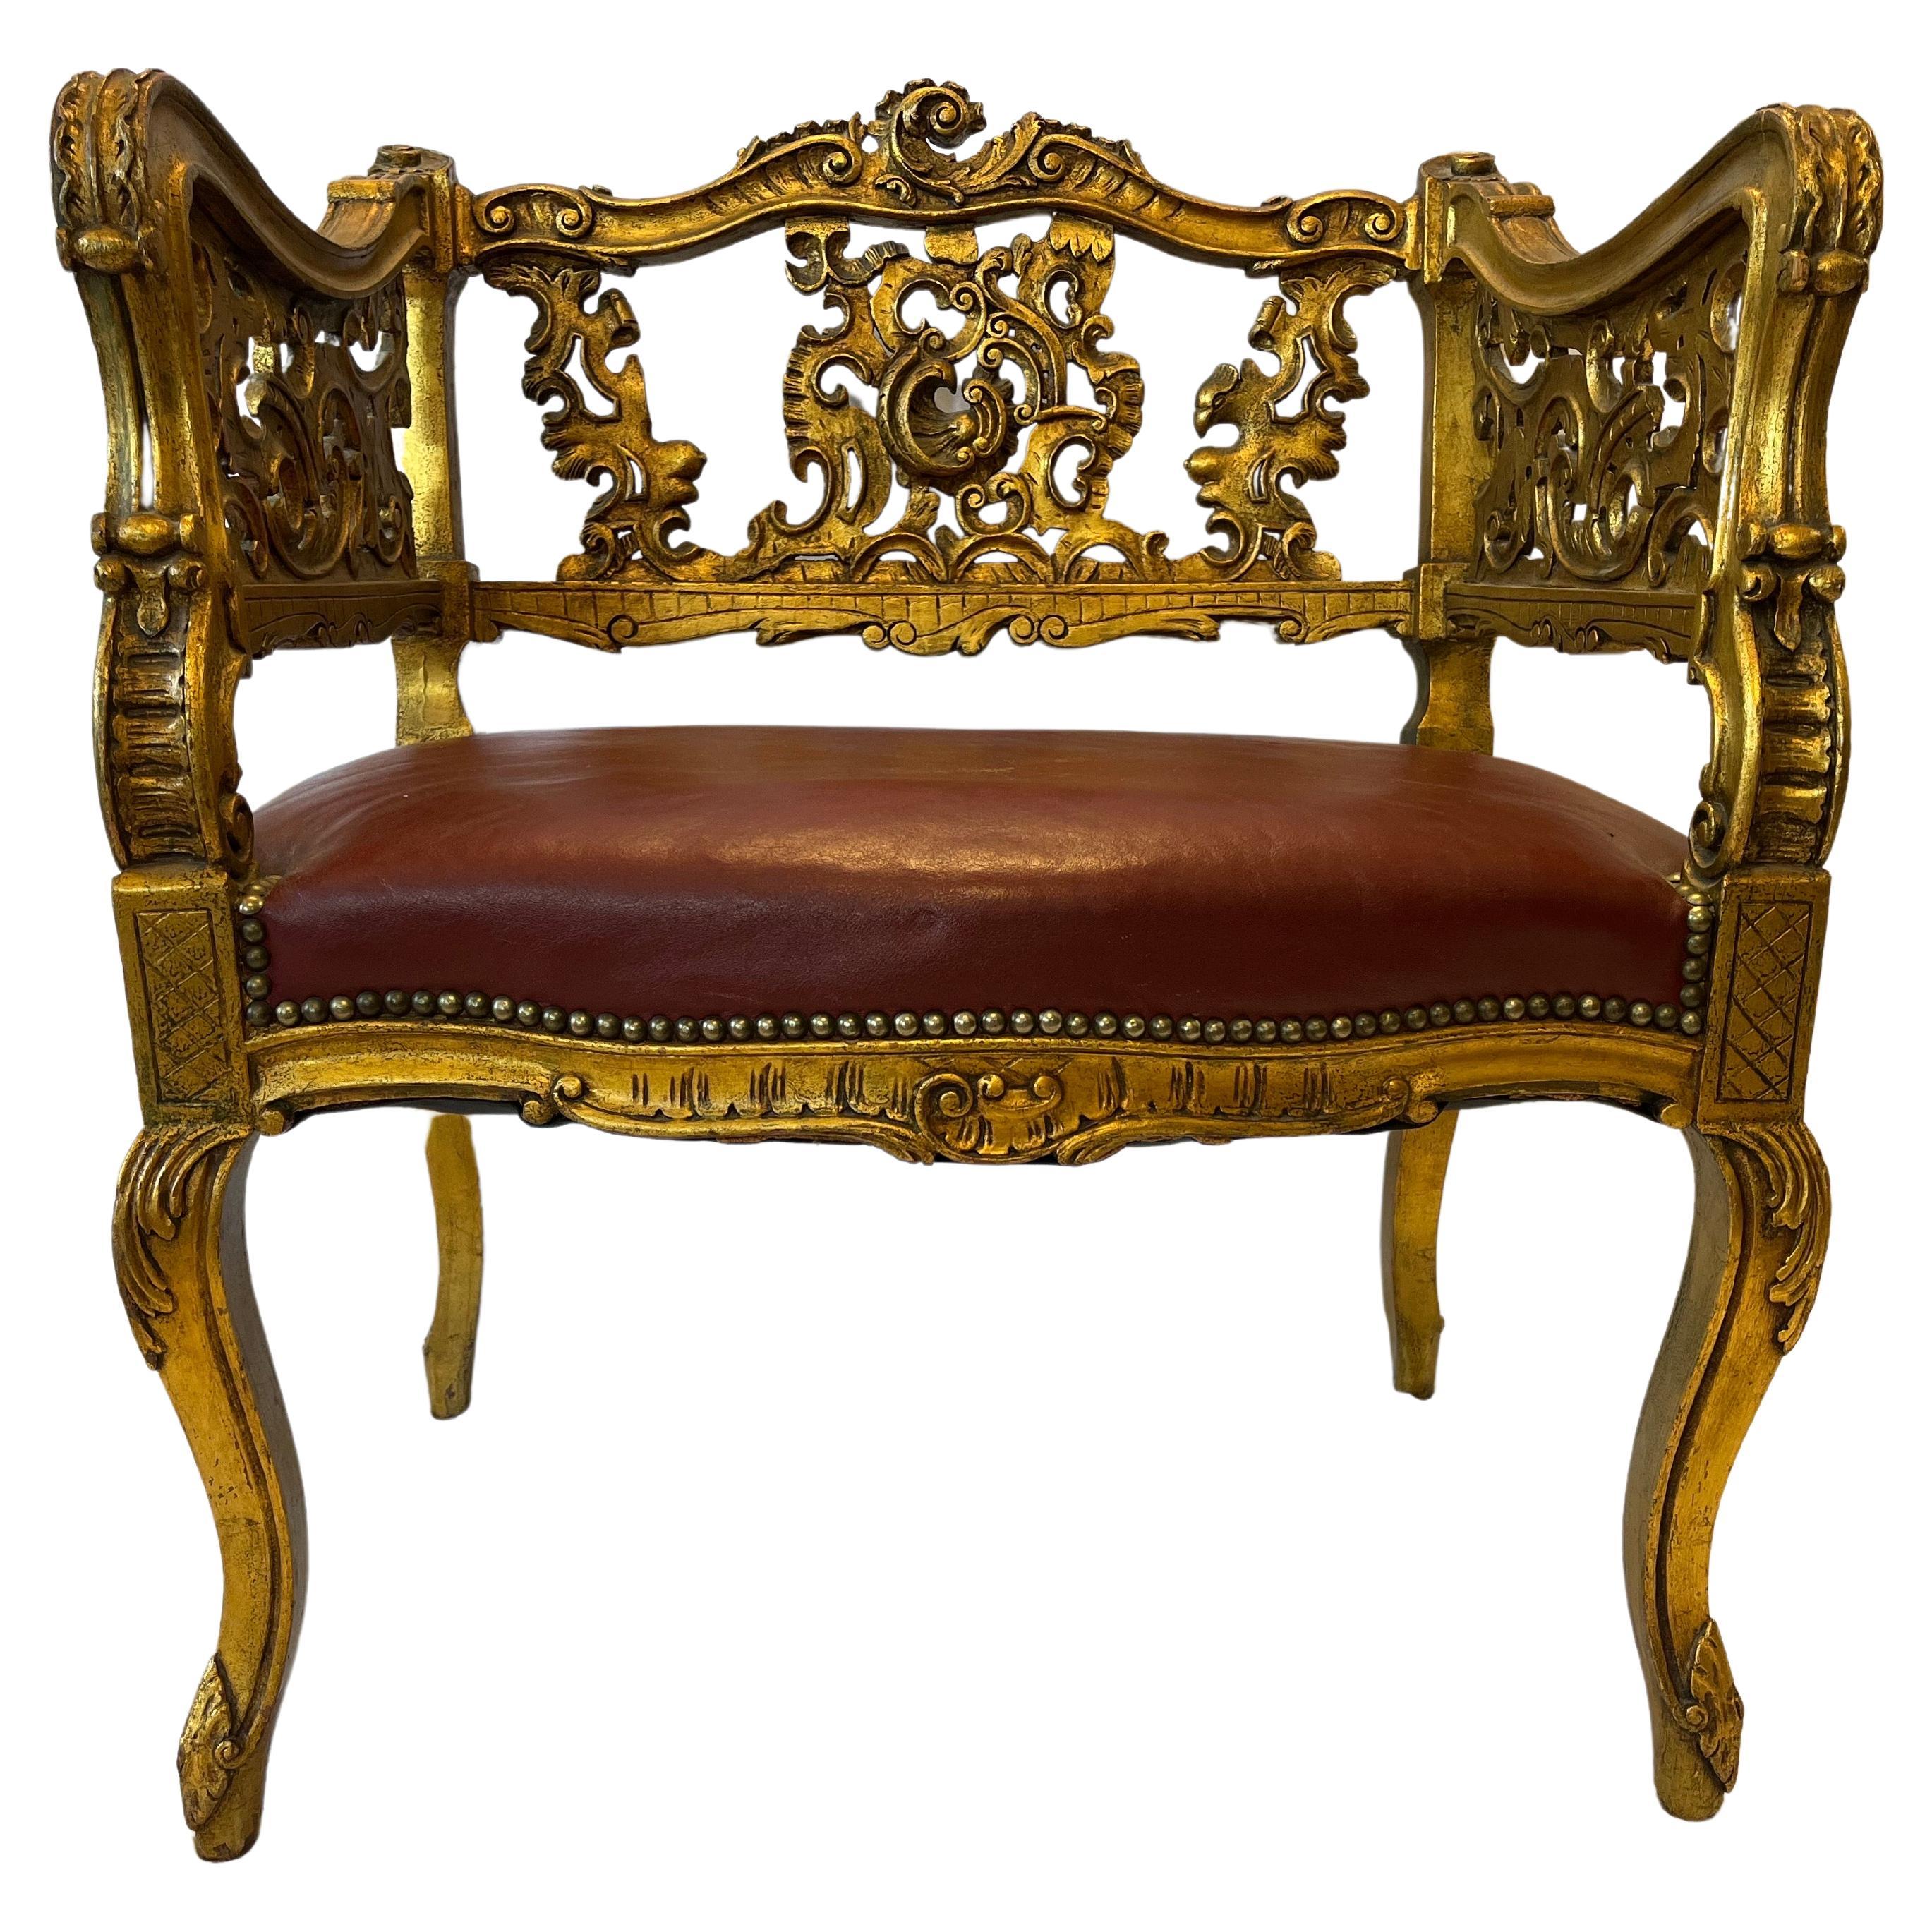 Antique Carved and Gilt Wood Arm Chair Bench Ornate Design Red Upholstered Seat For Sale